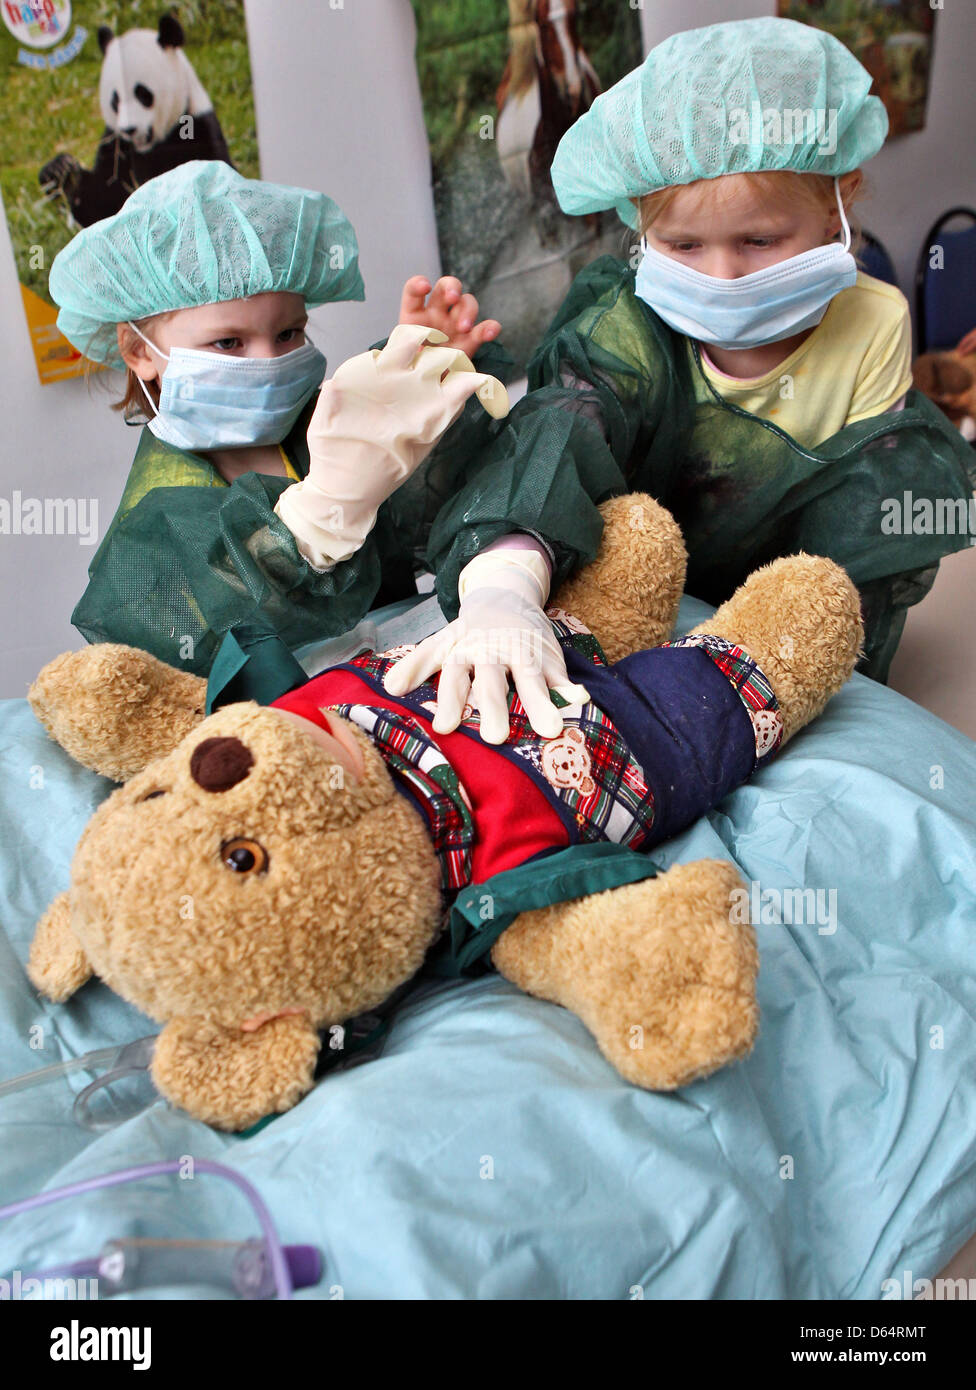 Marie (L) and Anna look at the teddy bear 'Mr bear' at the 'Teddy bear clinic' in Halle (Saale), Germany, 04 June 2012. During the surgery the appendix of the bear is removed. The Teddy bear clinic wishes to remove the fear of hospitalisation. Photo: Jan Woitas Stock Photo